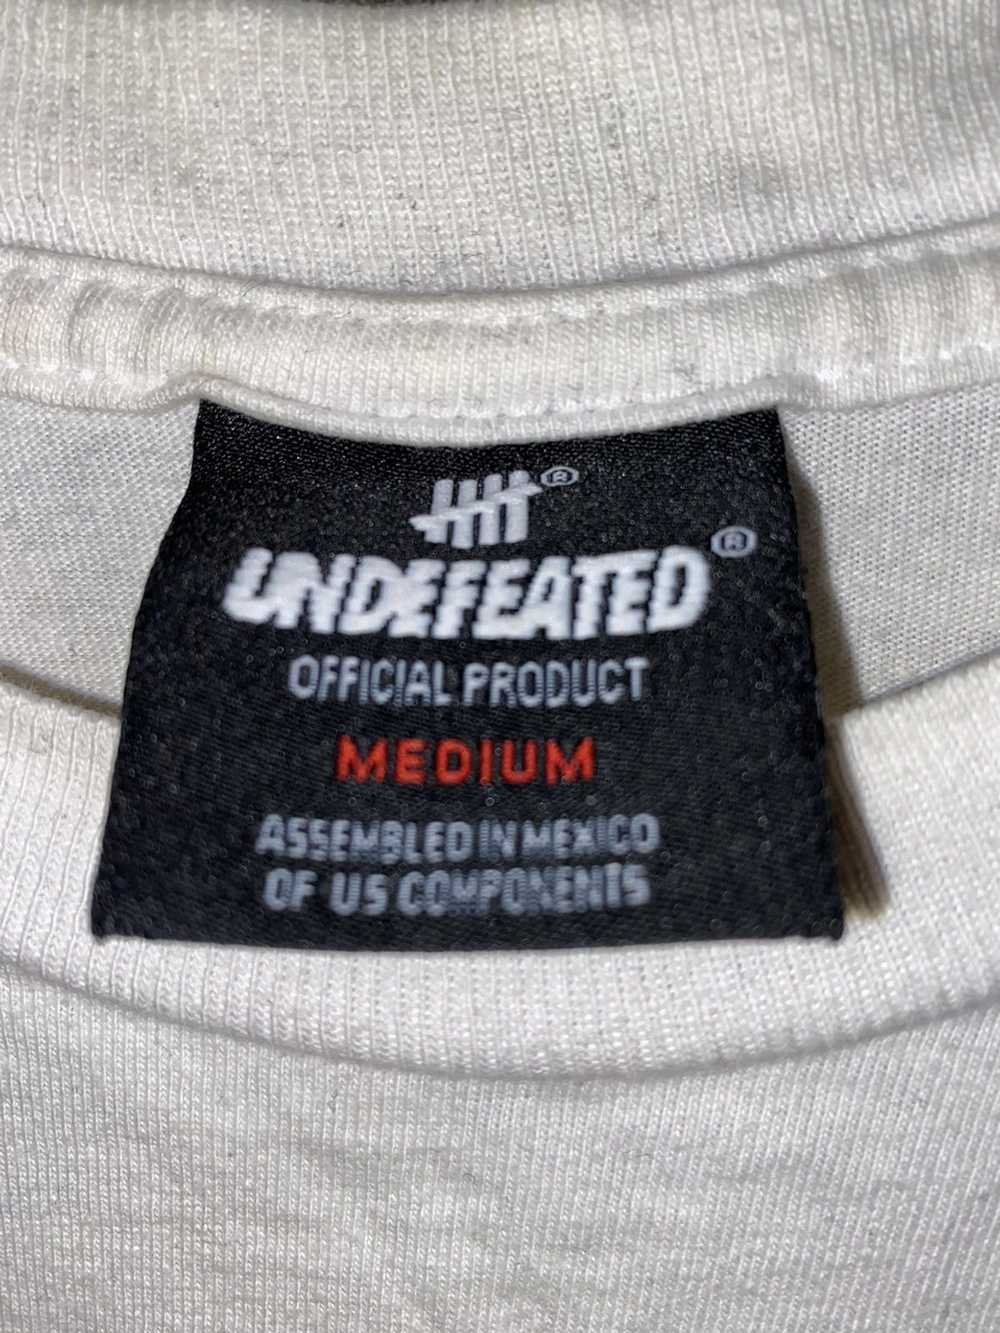 Undefeated Undefeated UNDFTD L/S Longsleeve (Whit… - image 3